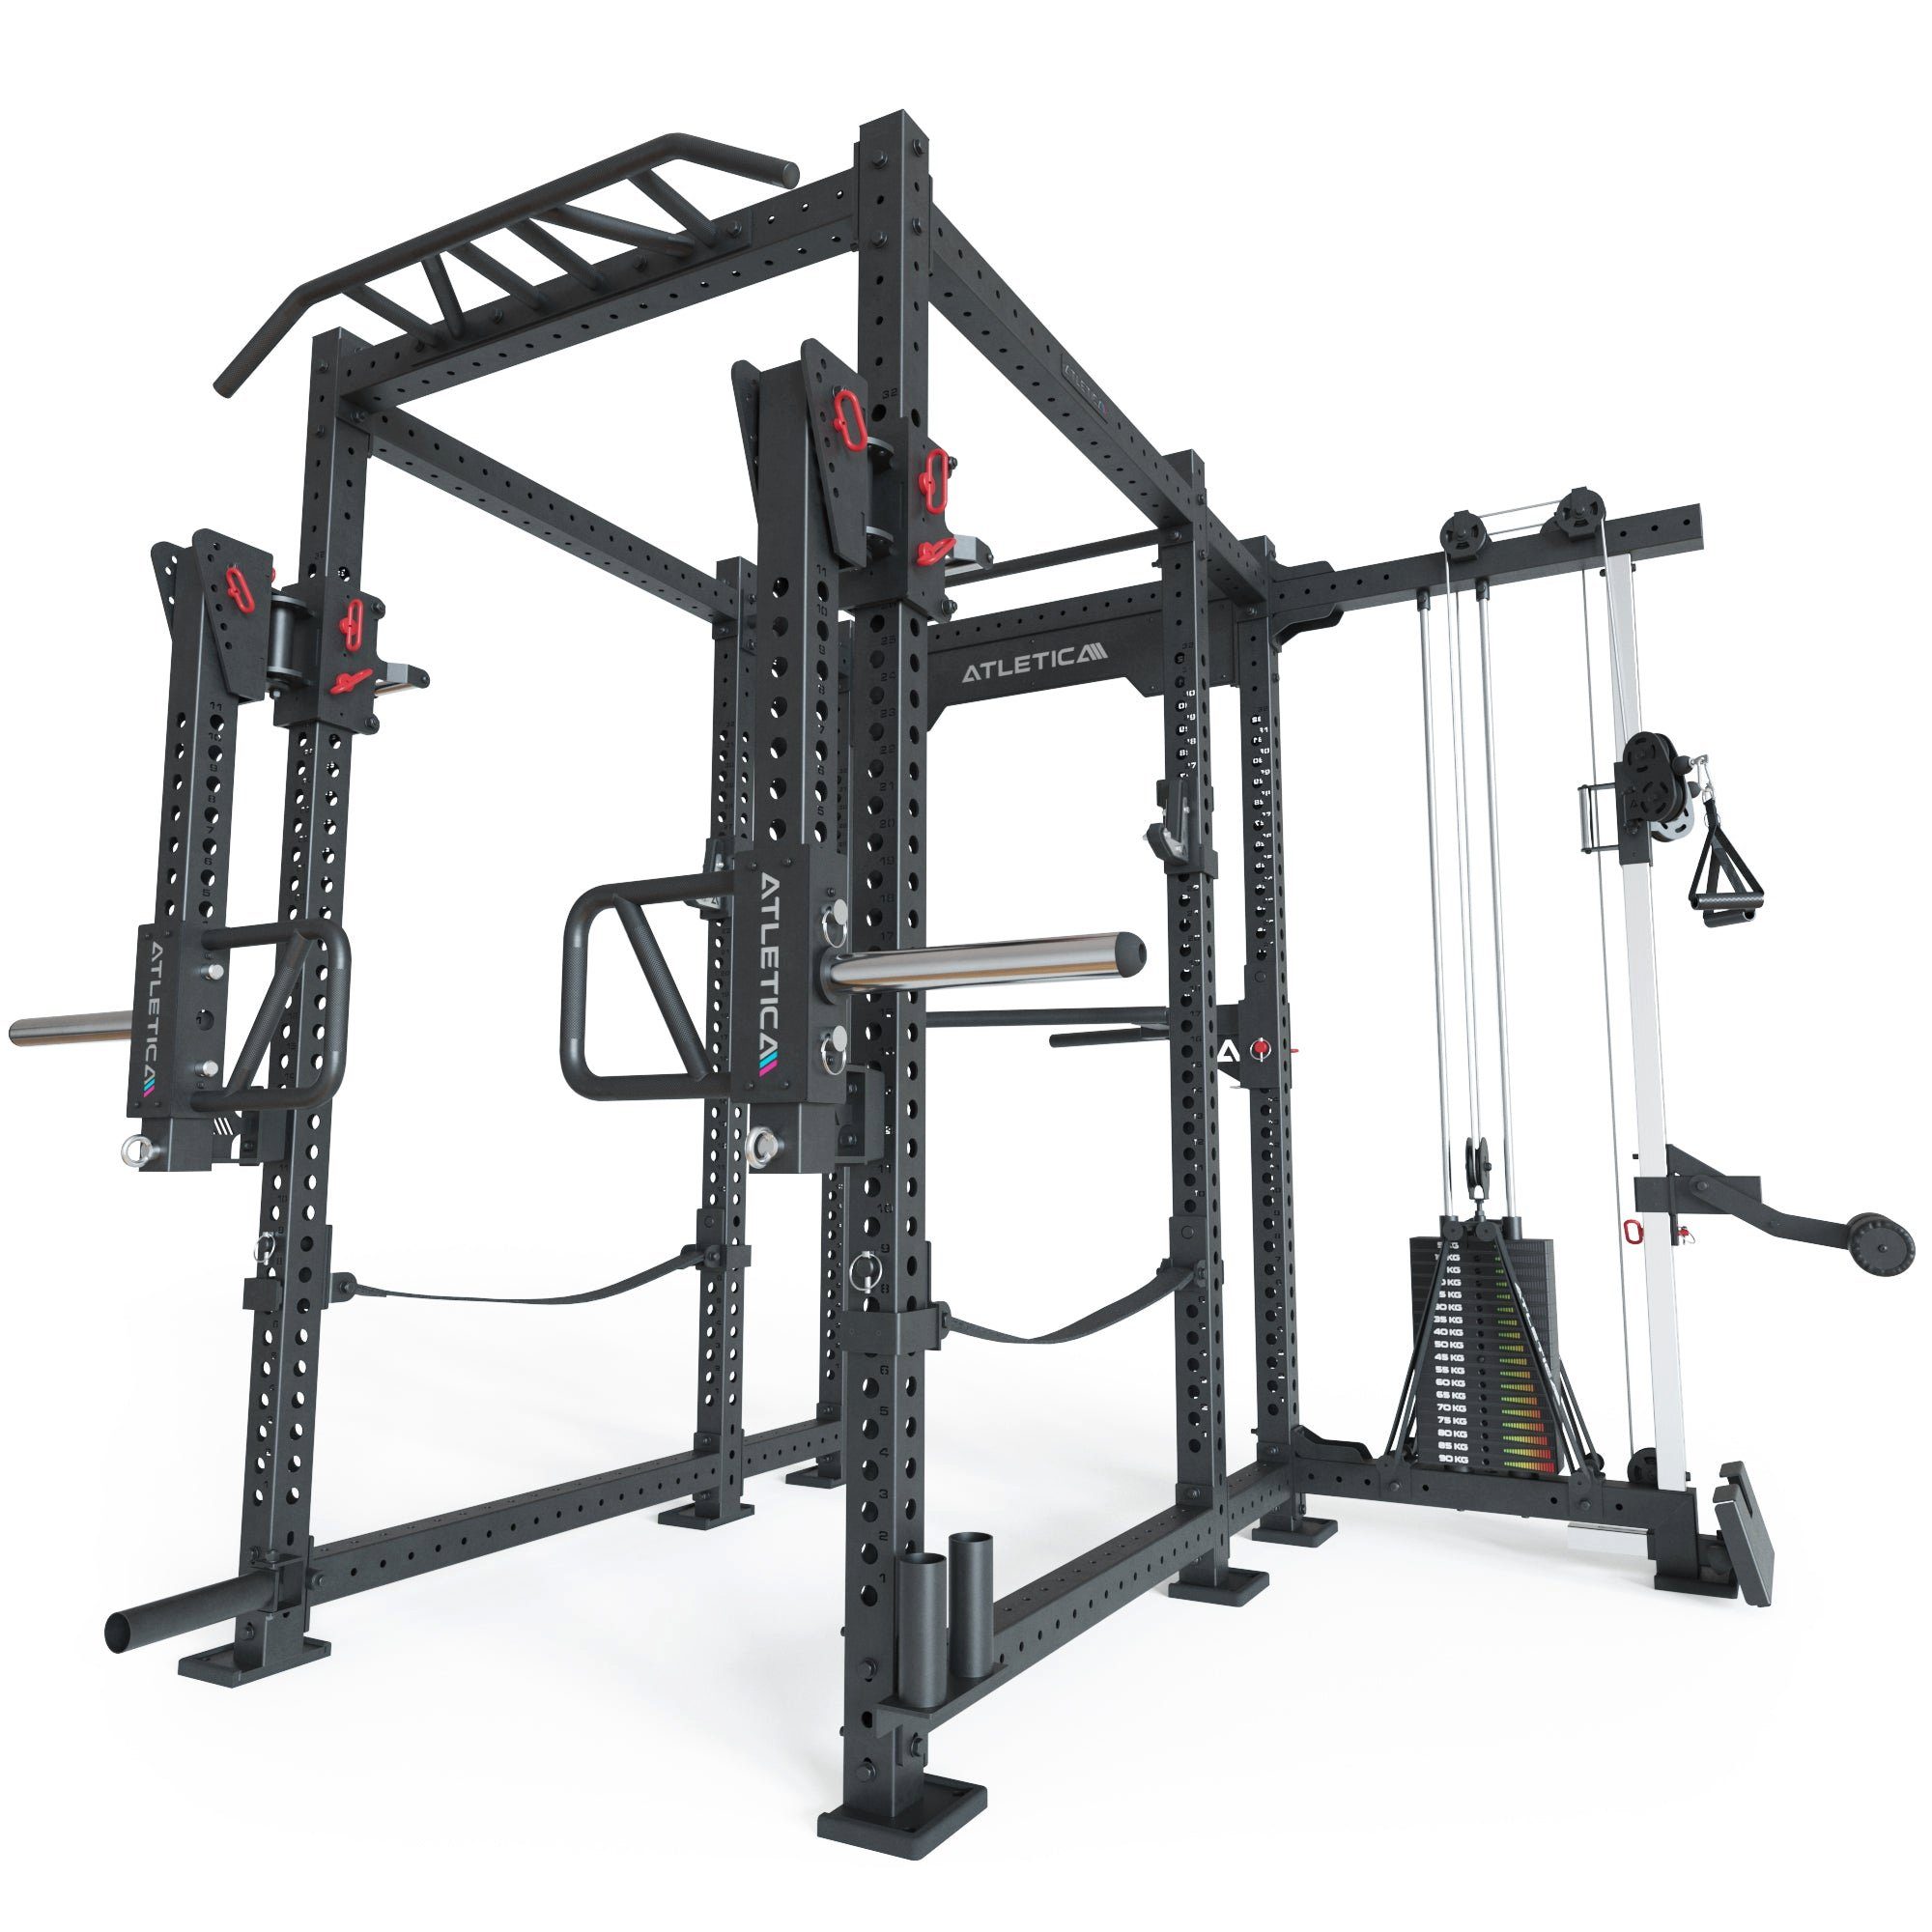 ATLETICA Power Rack R8-Sentinel PRO Power Rack Cable Rack mit 90 kg Stack